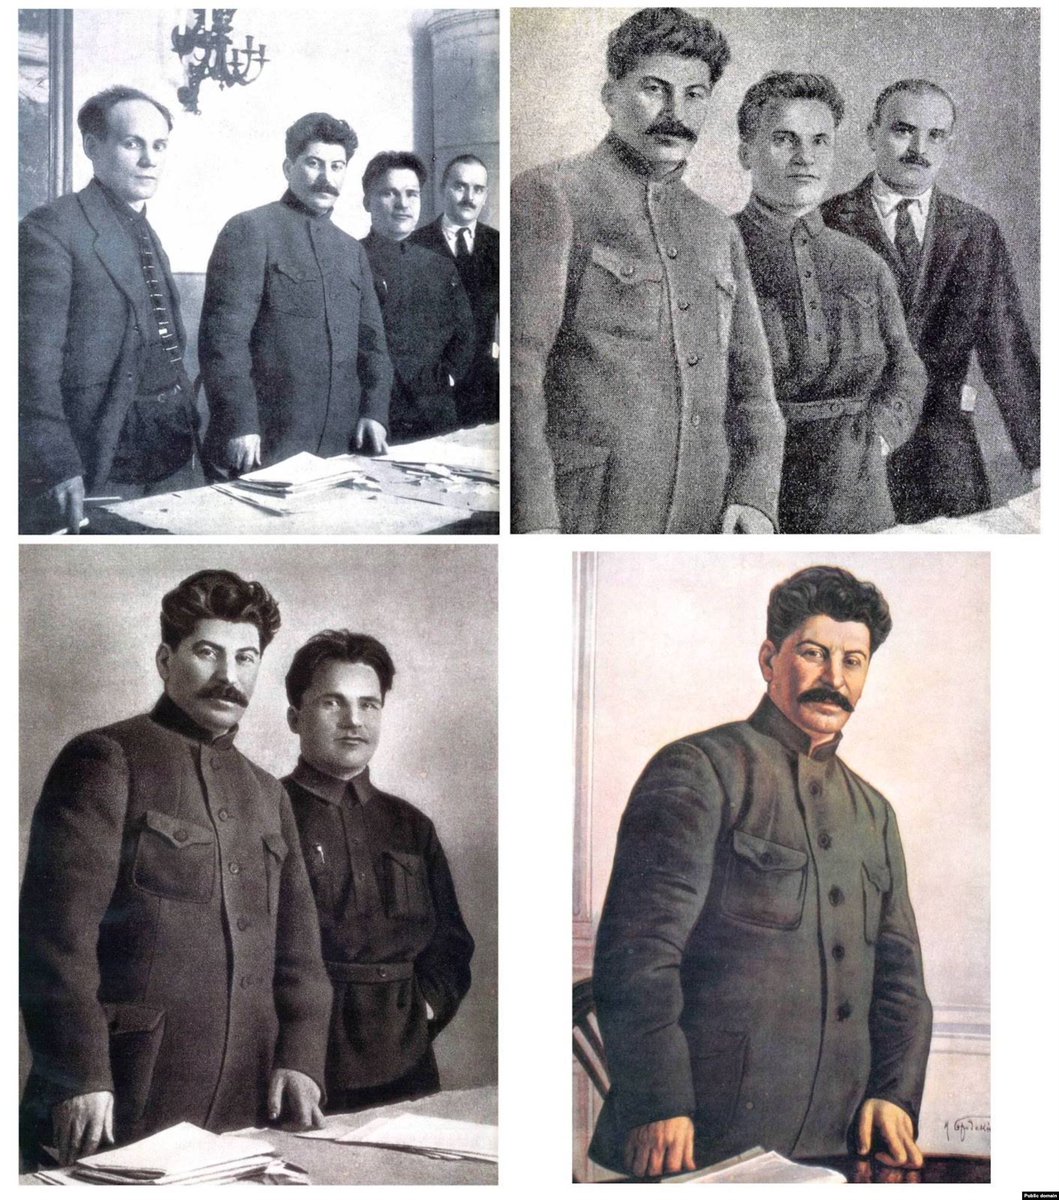 Subtly over time they did photo/painting manipulation to make stalin, less georgian and more hardcore ben shapiro level khazar